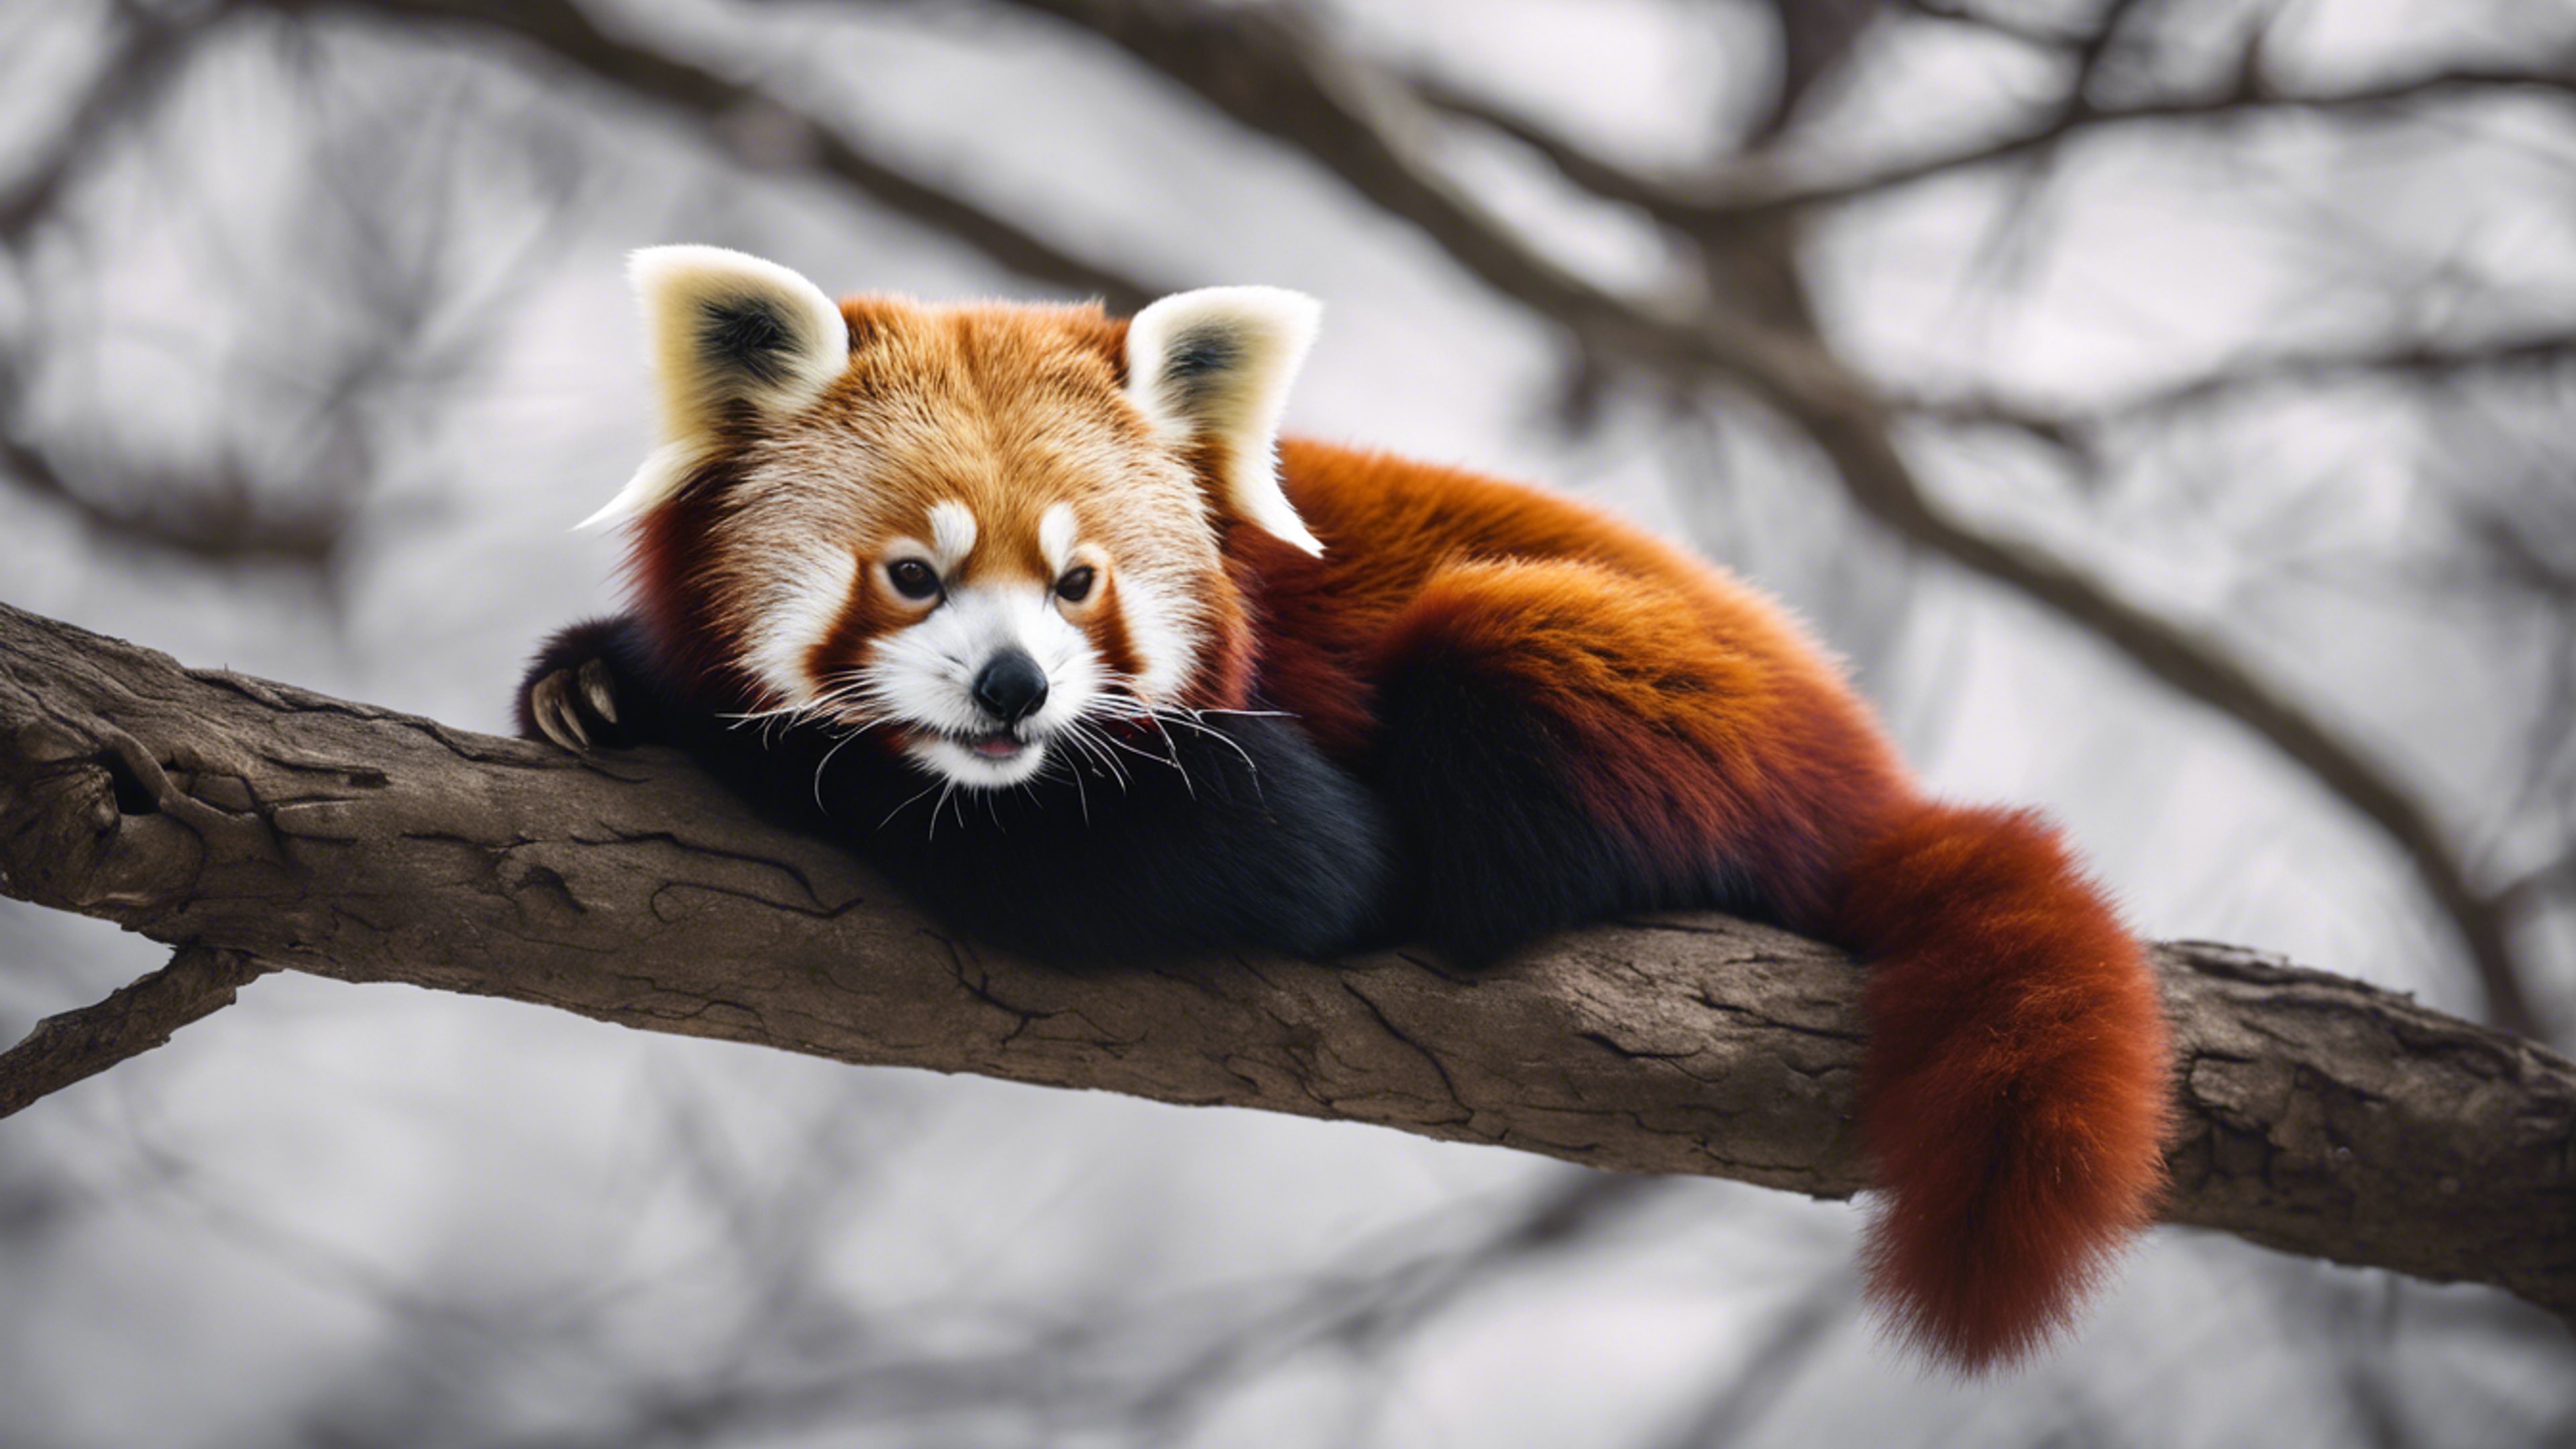 A red panda enjoying a peaceful nap on a thick tree branch. Papel de parede[0844f7d1c6274207ac91]